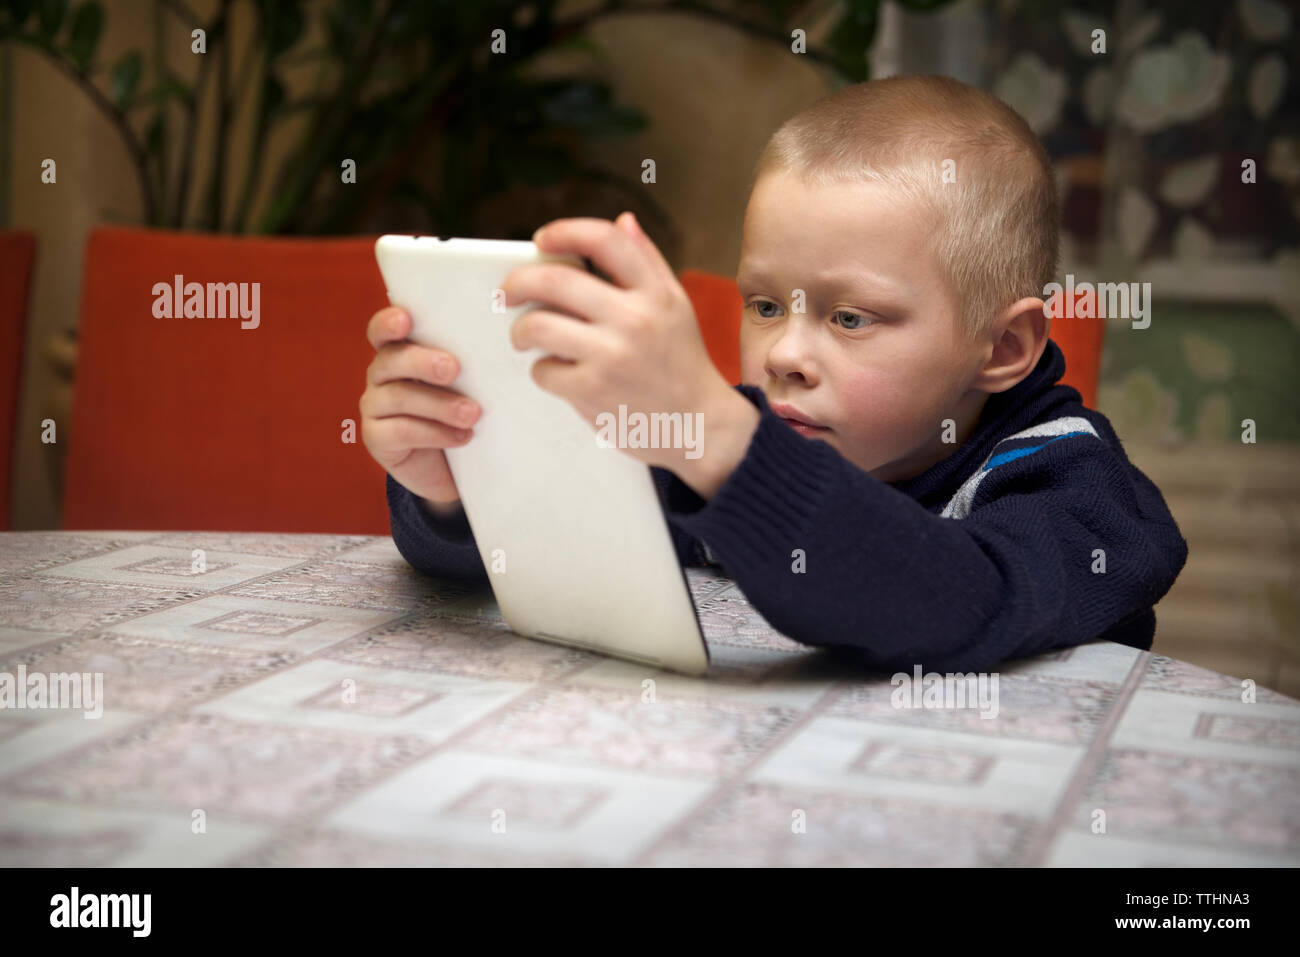 Boy using tablet computer while sitting at table Banque D'Images